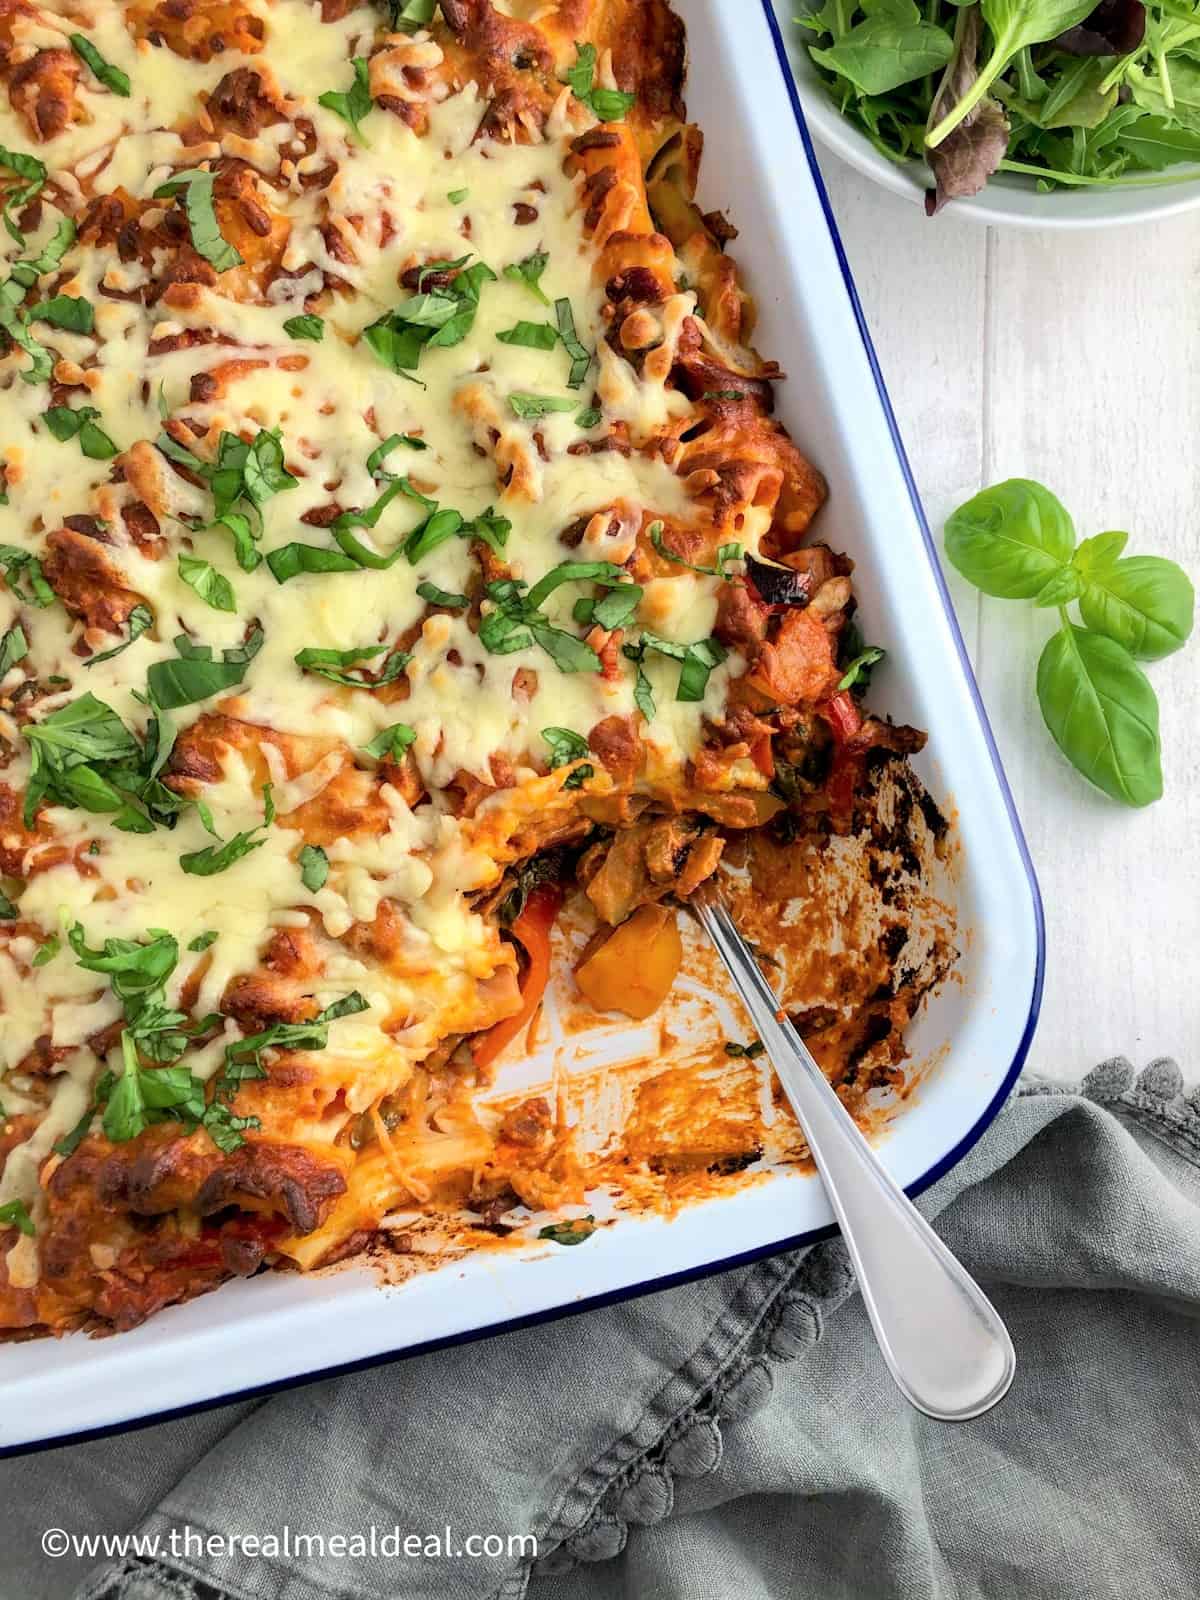 Vegetable Pasta bake in tray topped with fresh basil leaves